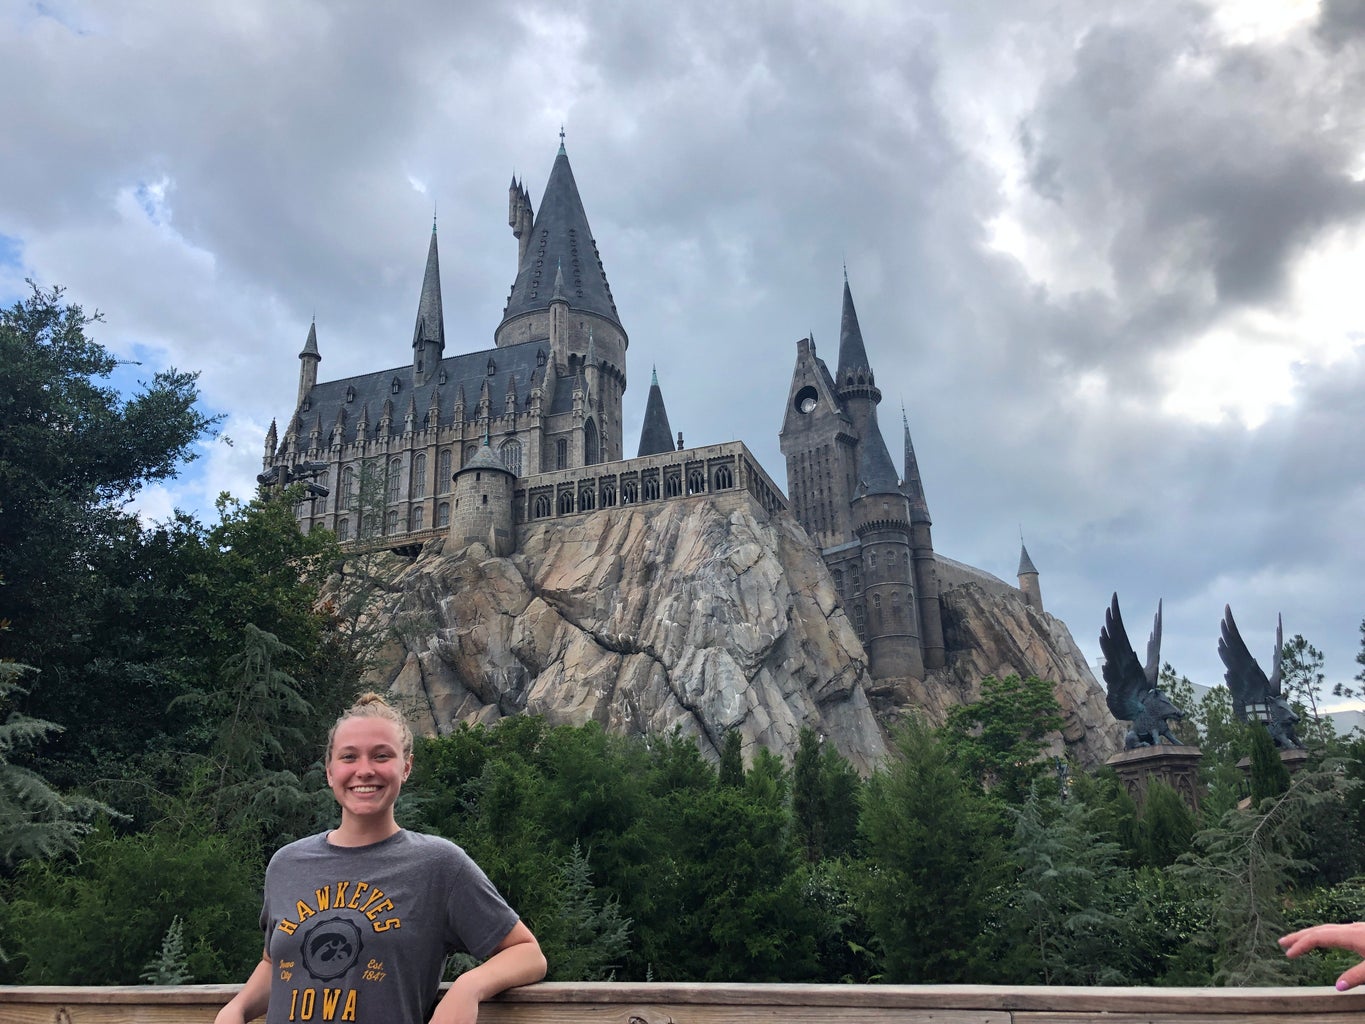 me in front of the hogwarts castle